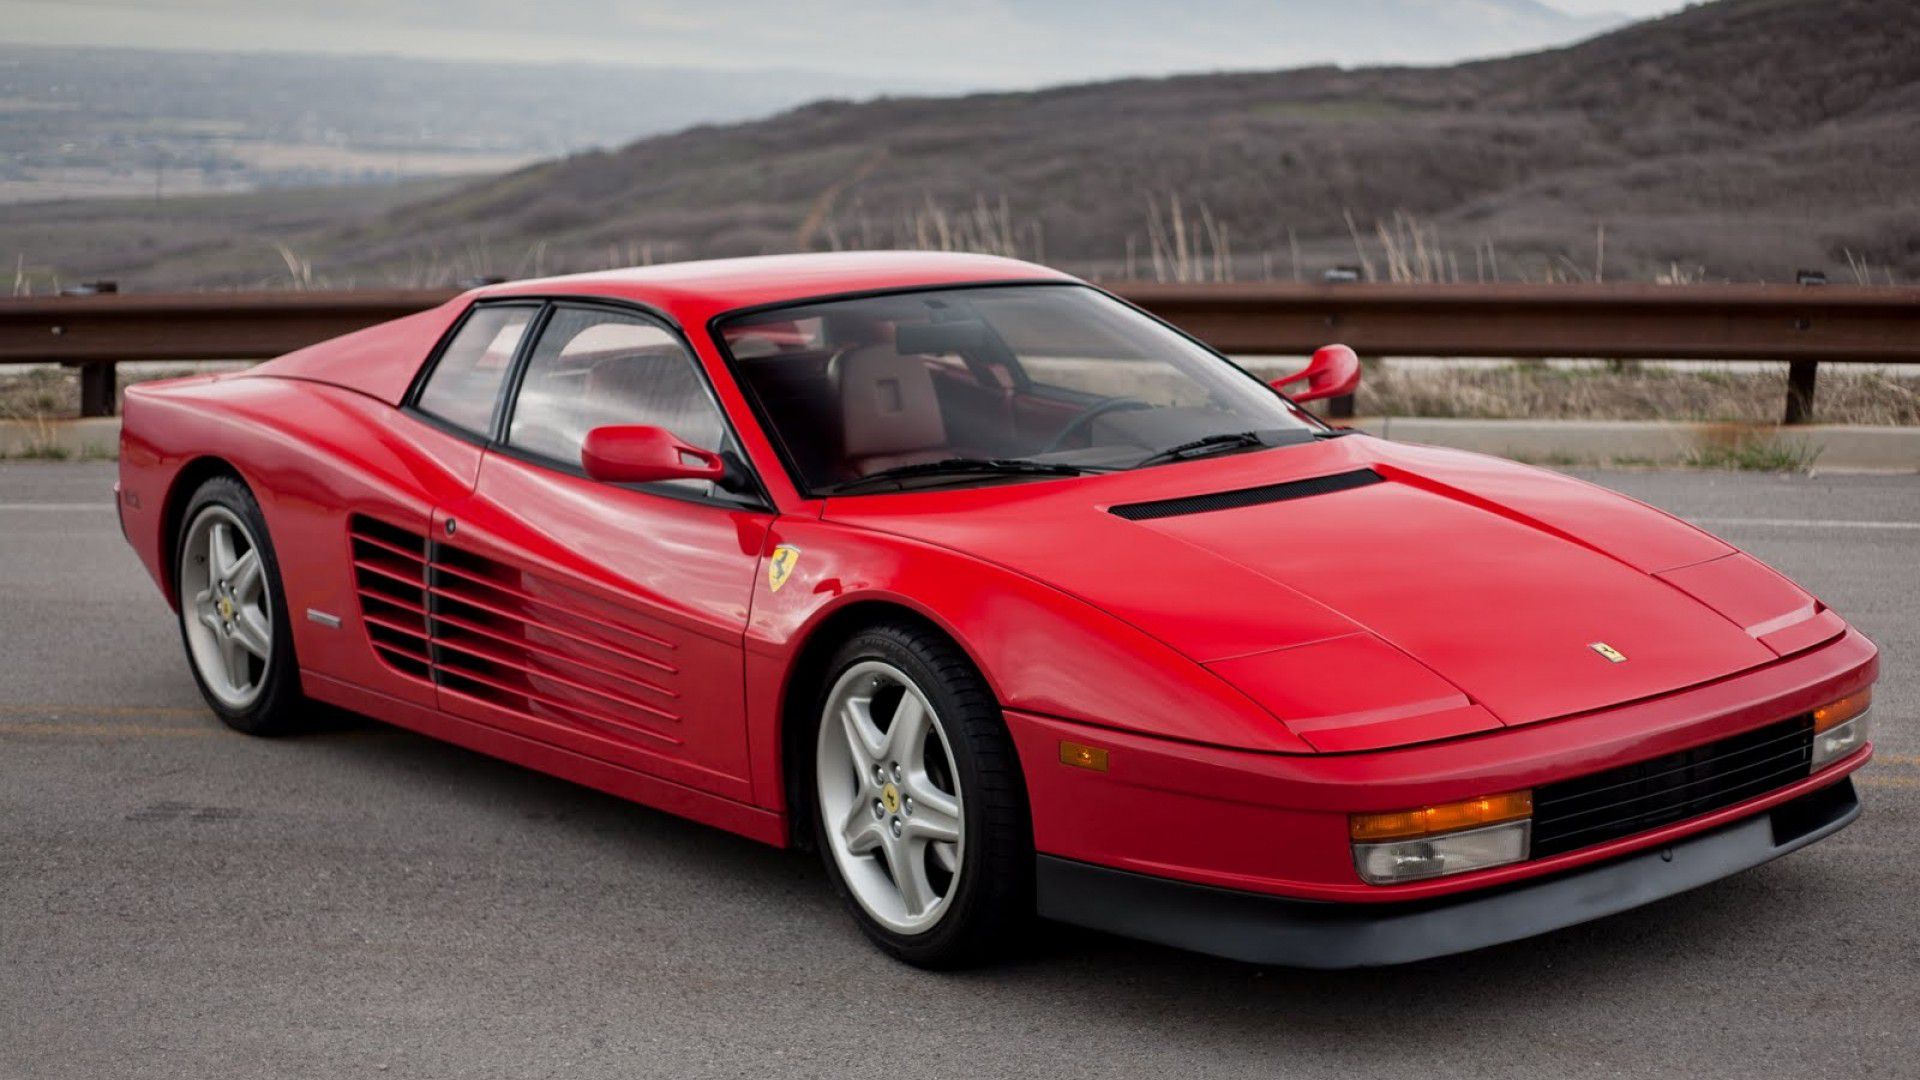 A red Ferrari Testarossa parked in a picturesque setting, showcasing its iconic design and timeless appeal.